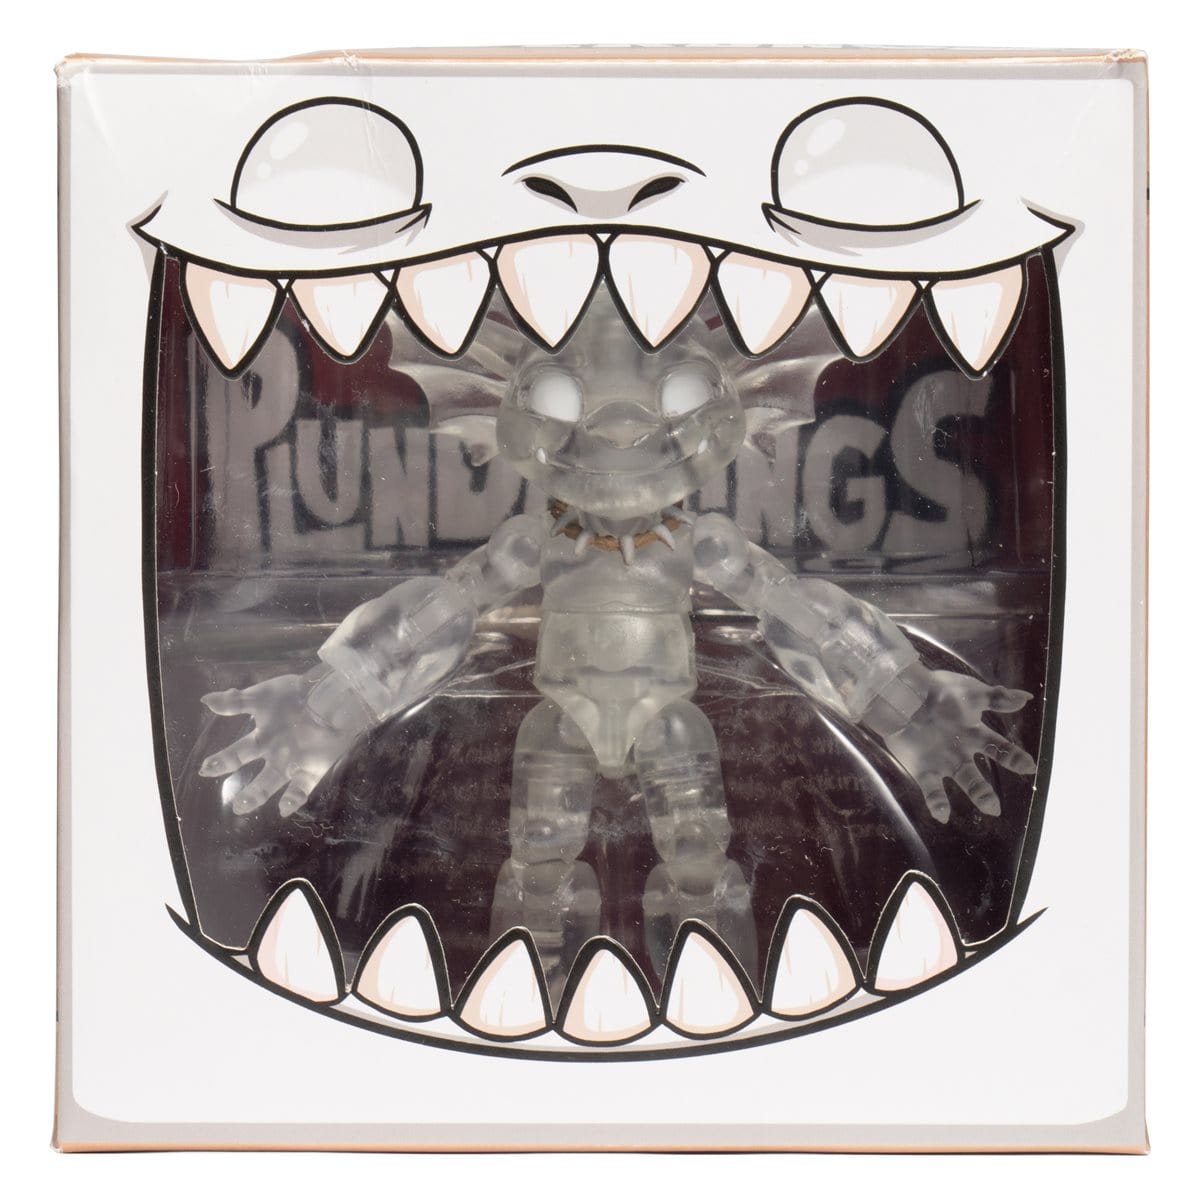 Plunderlings Drench Arctic Clear Variant 1:12 Scale Action Figure - Convention Exclusive Pop-O-Loco